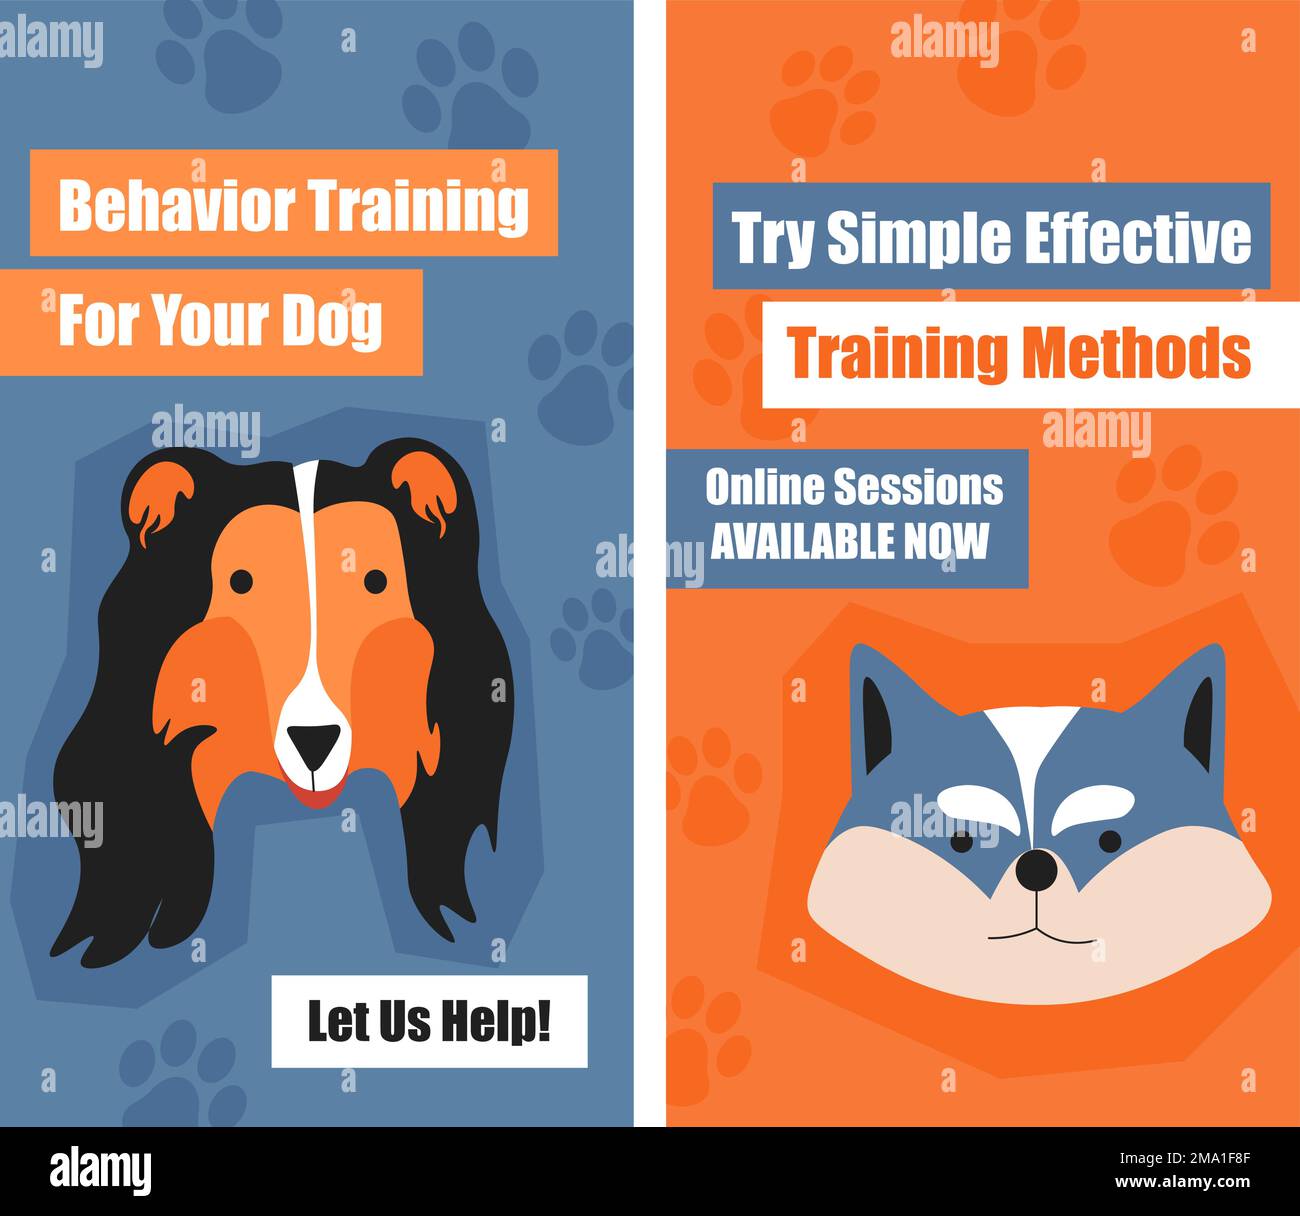 Behavior training for your dog, online sessions Stock Vector